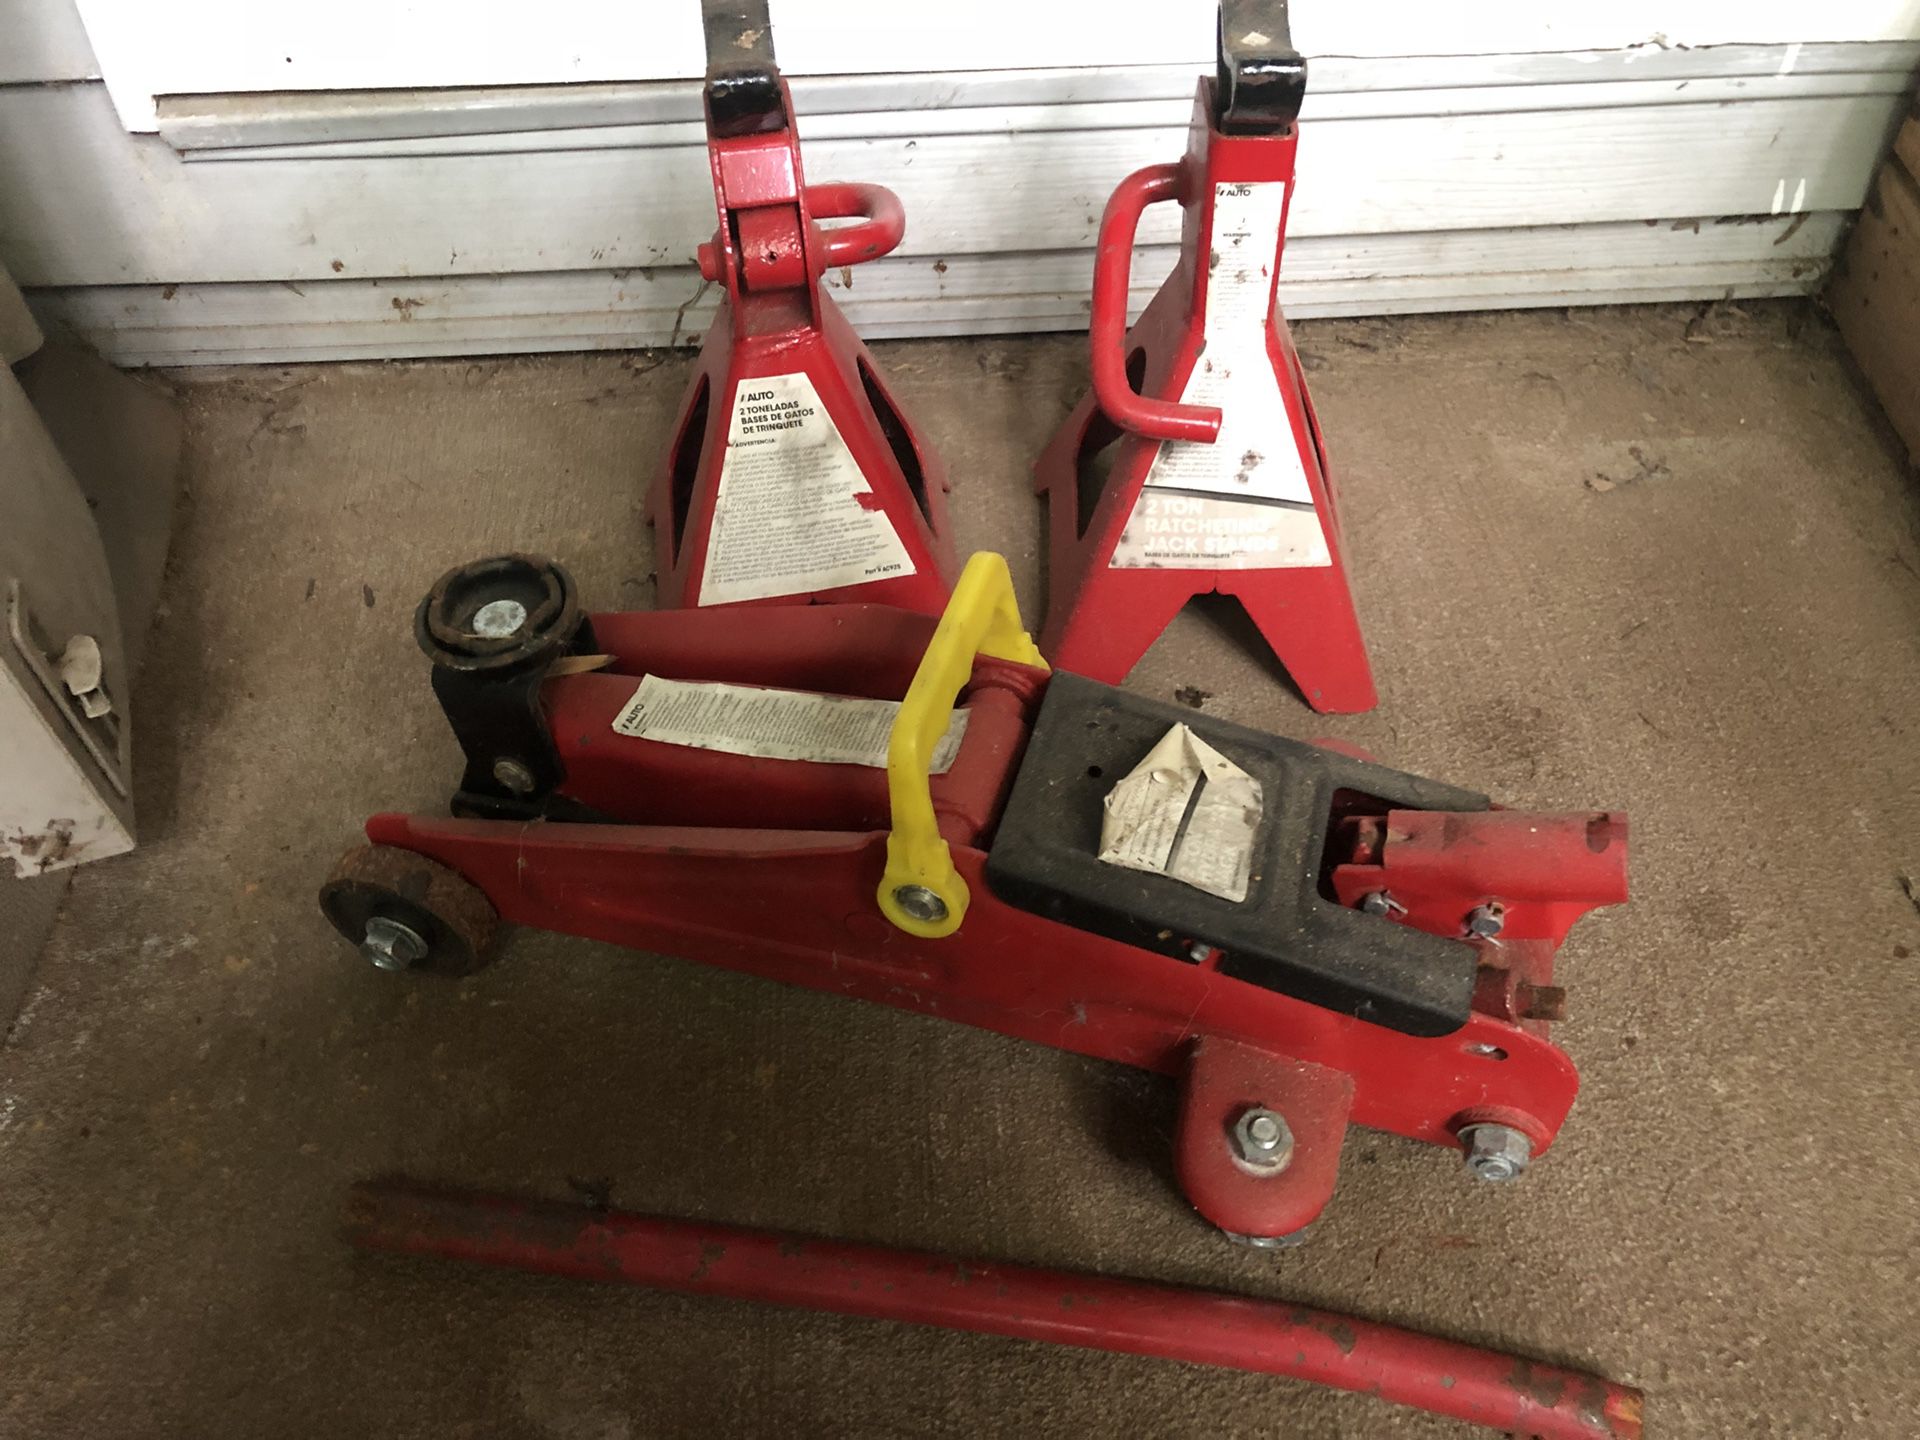 2 Ton hydraulic floor jack and pair of jack stands.